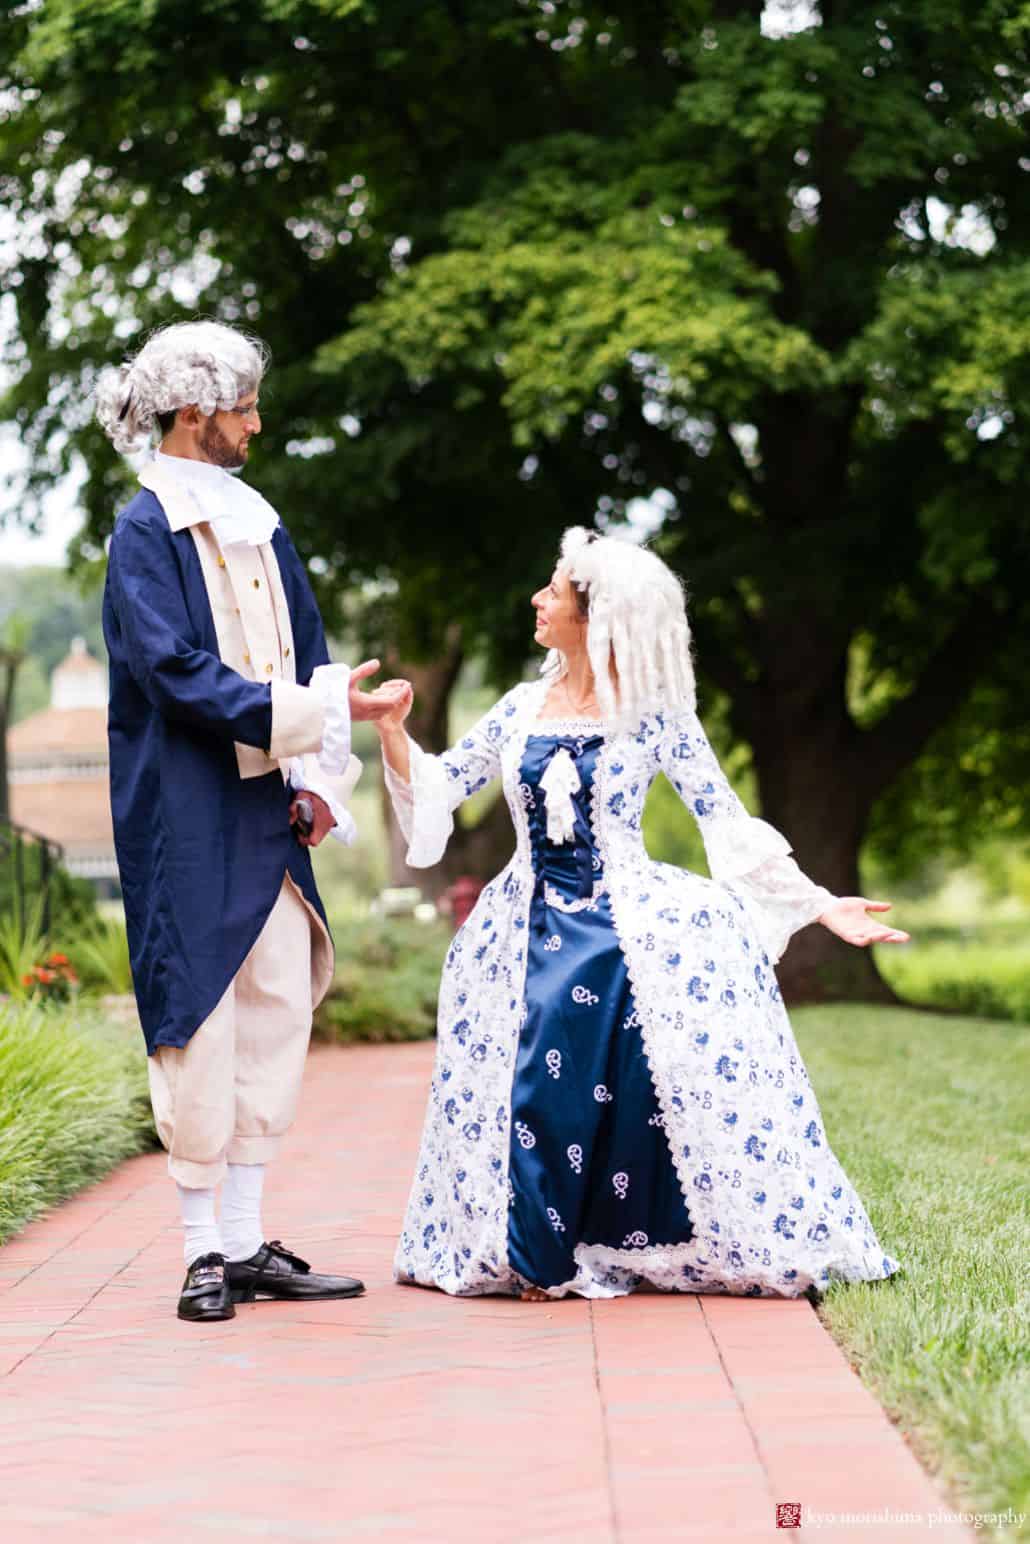 Bride and groom wearing 18th century formal dress and white wigs at Chauncey Center wedding.